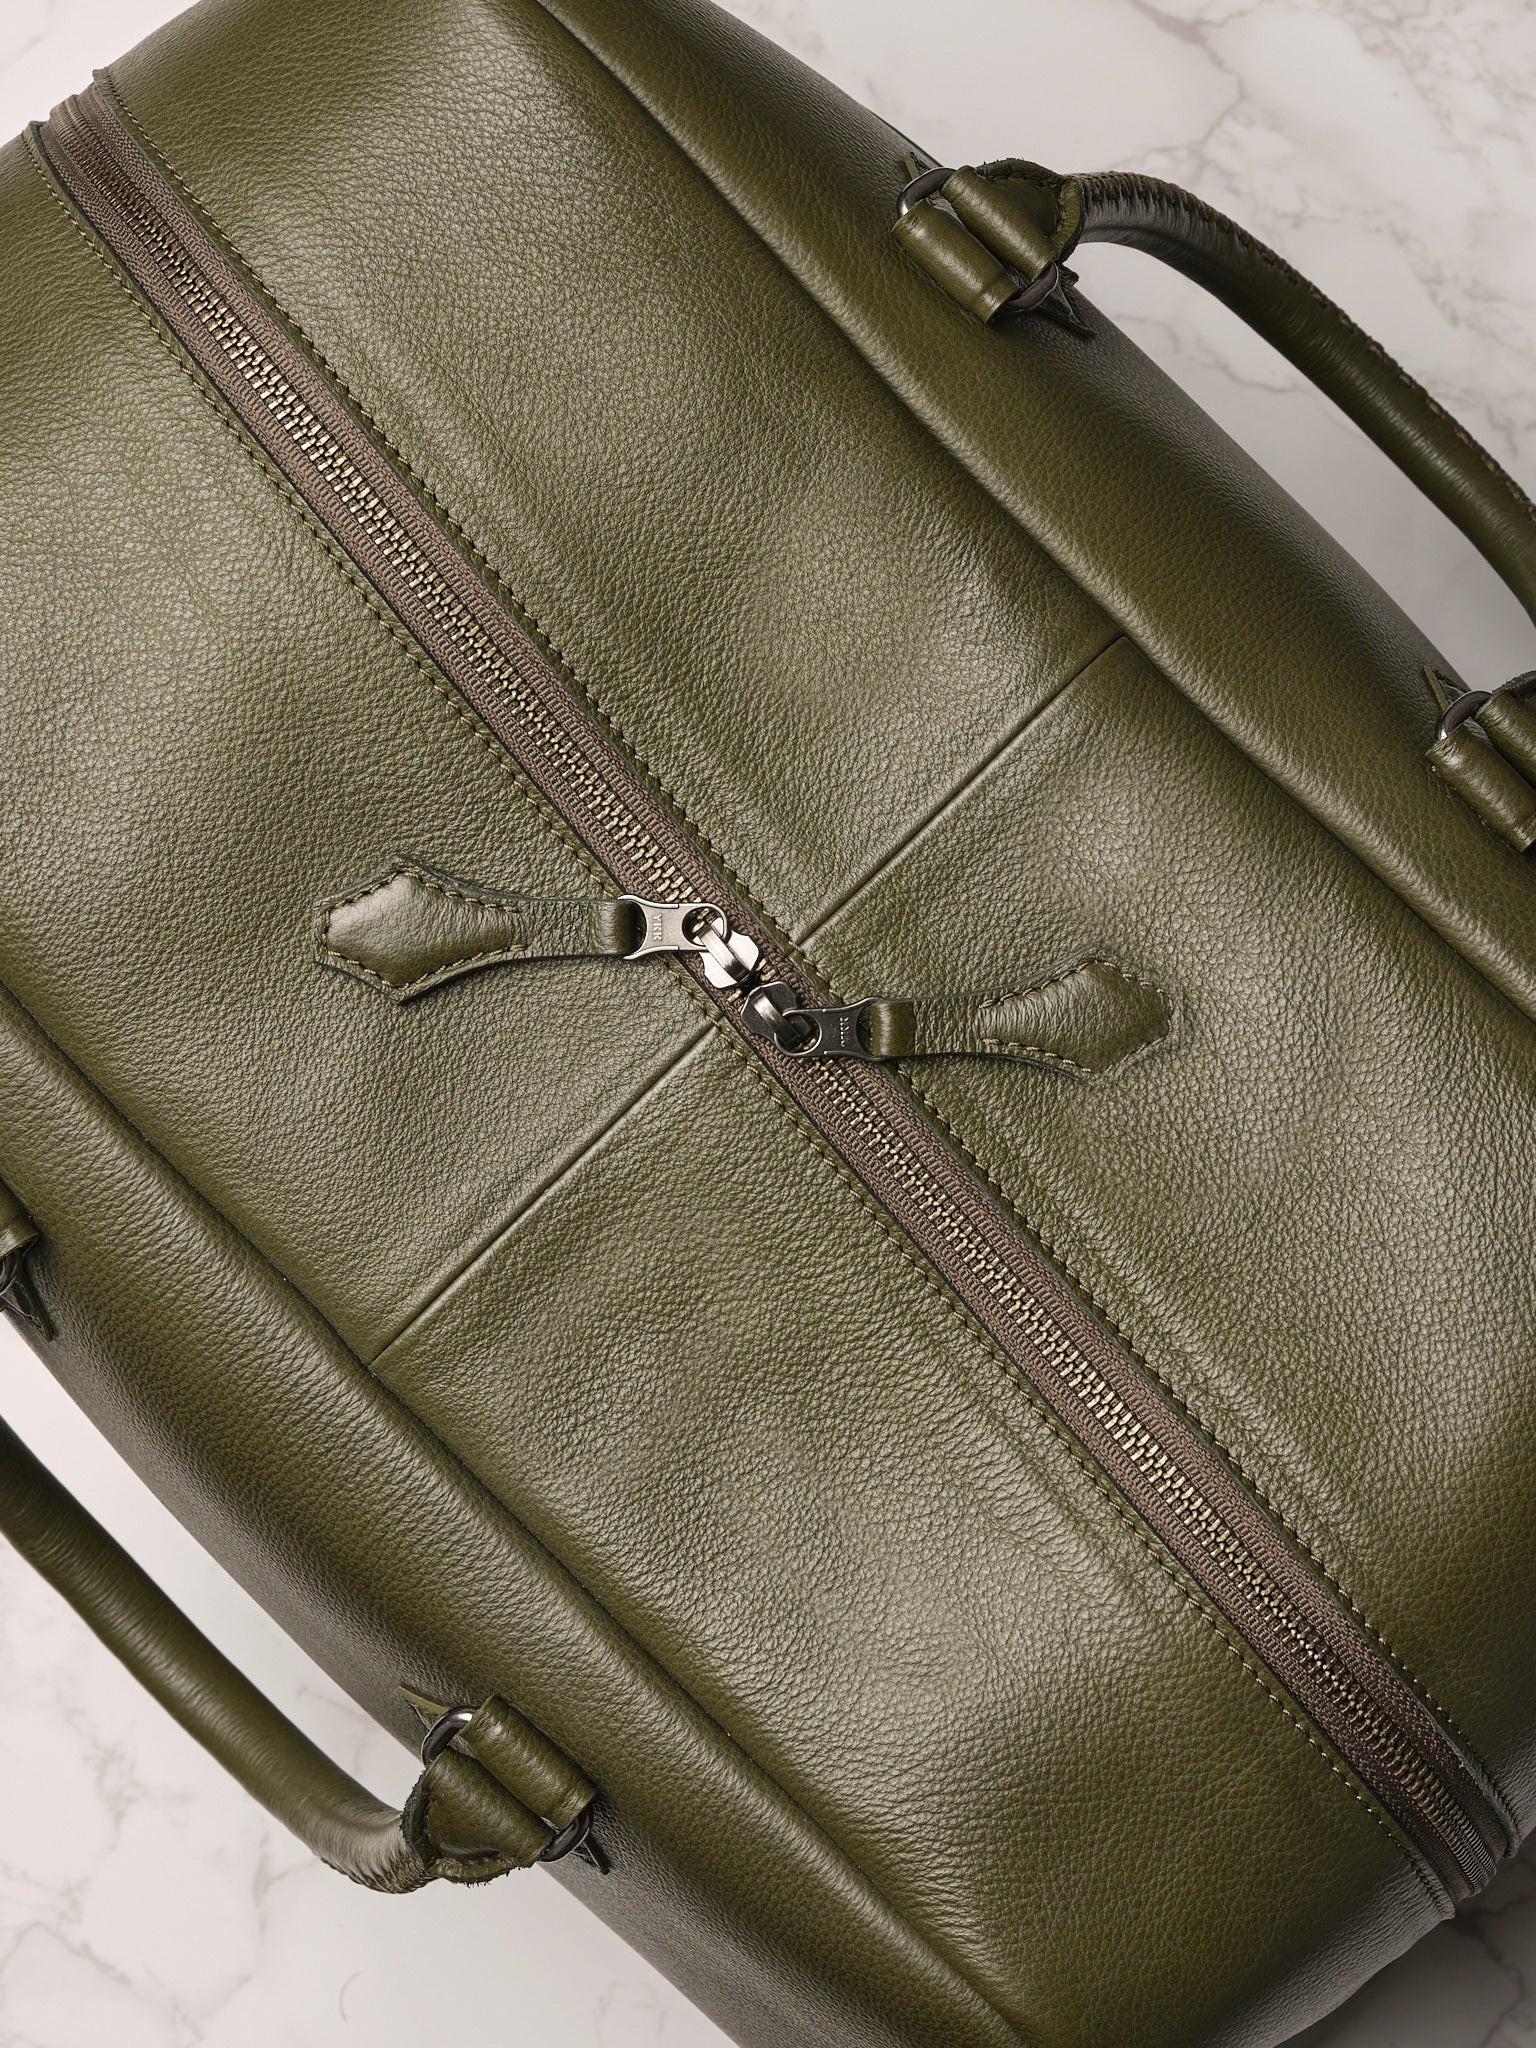 Wide Main Compartment. Duffle Bag Travel Green by Capra Leather